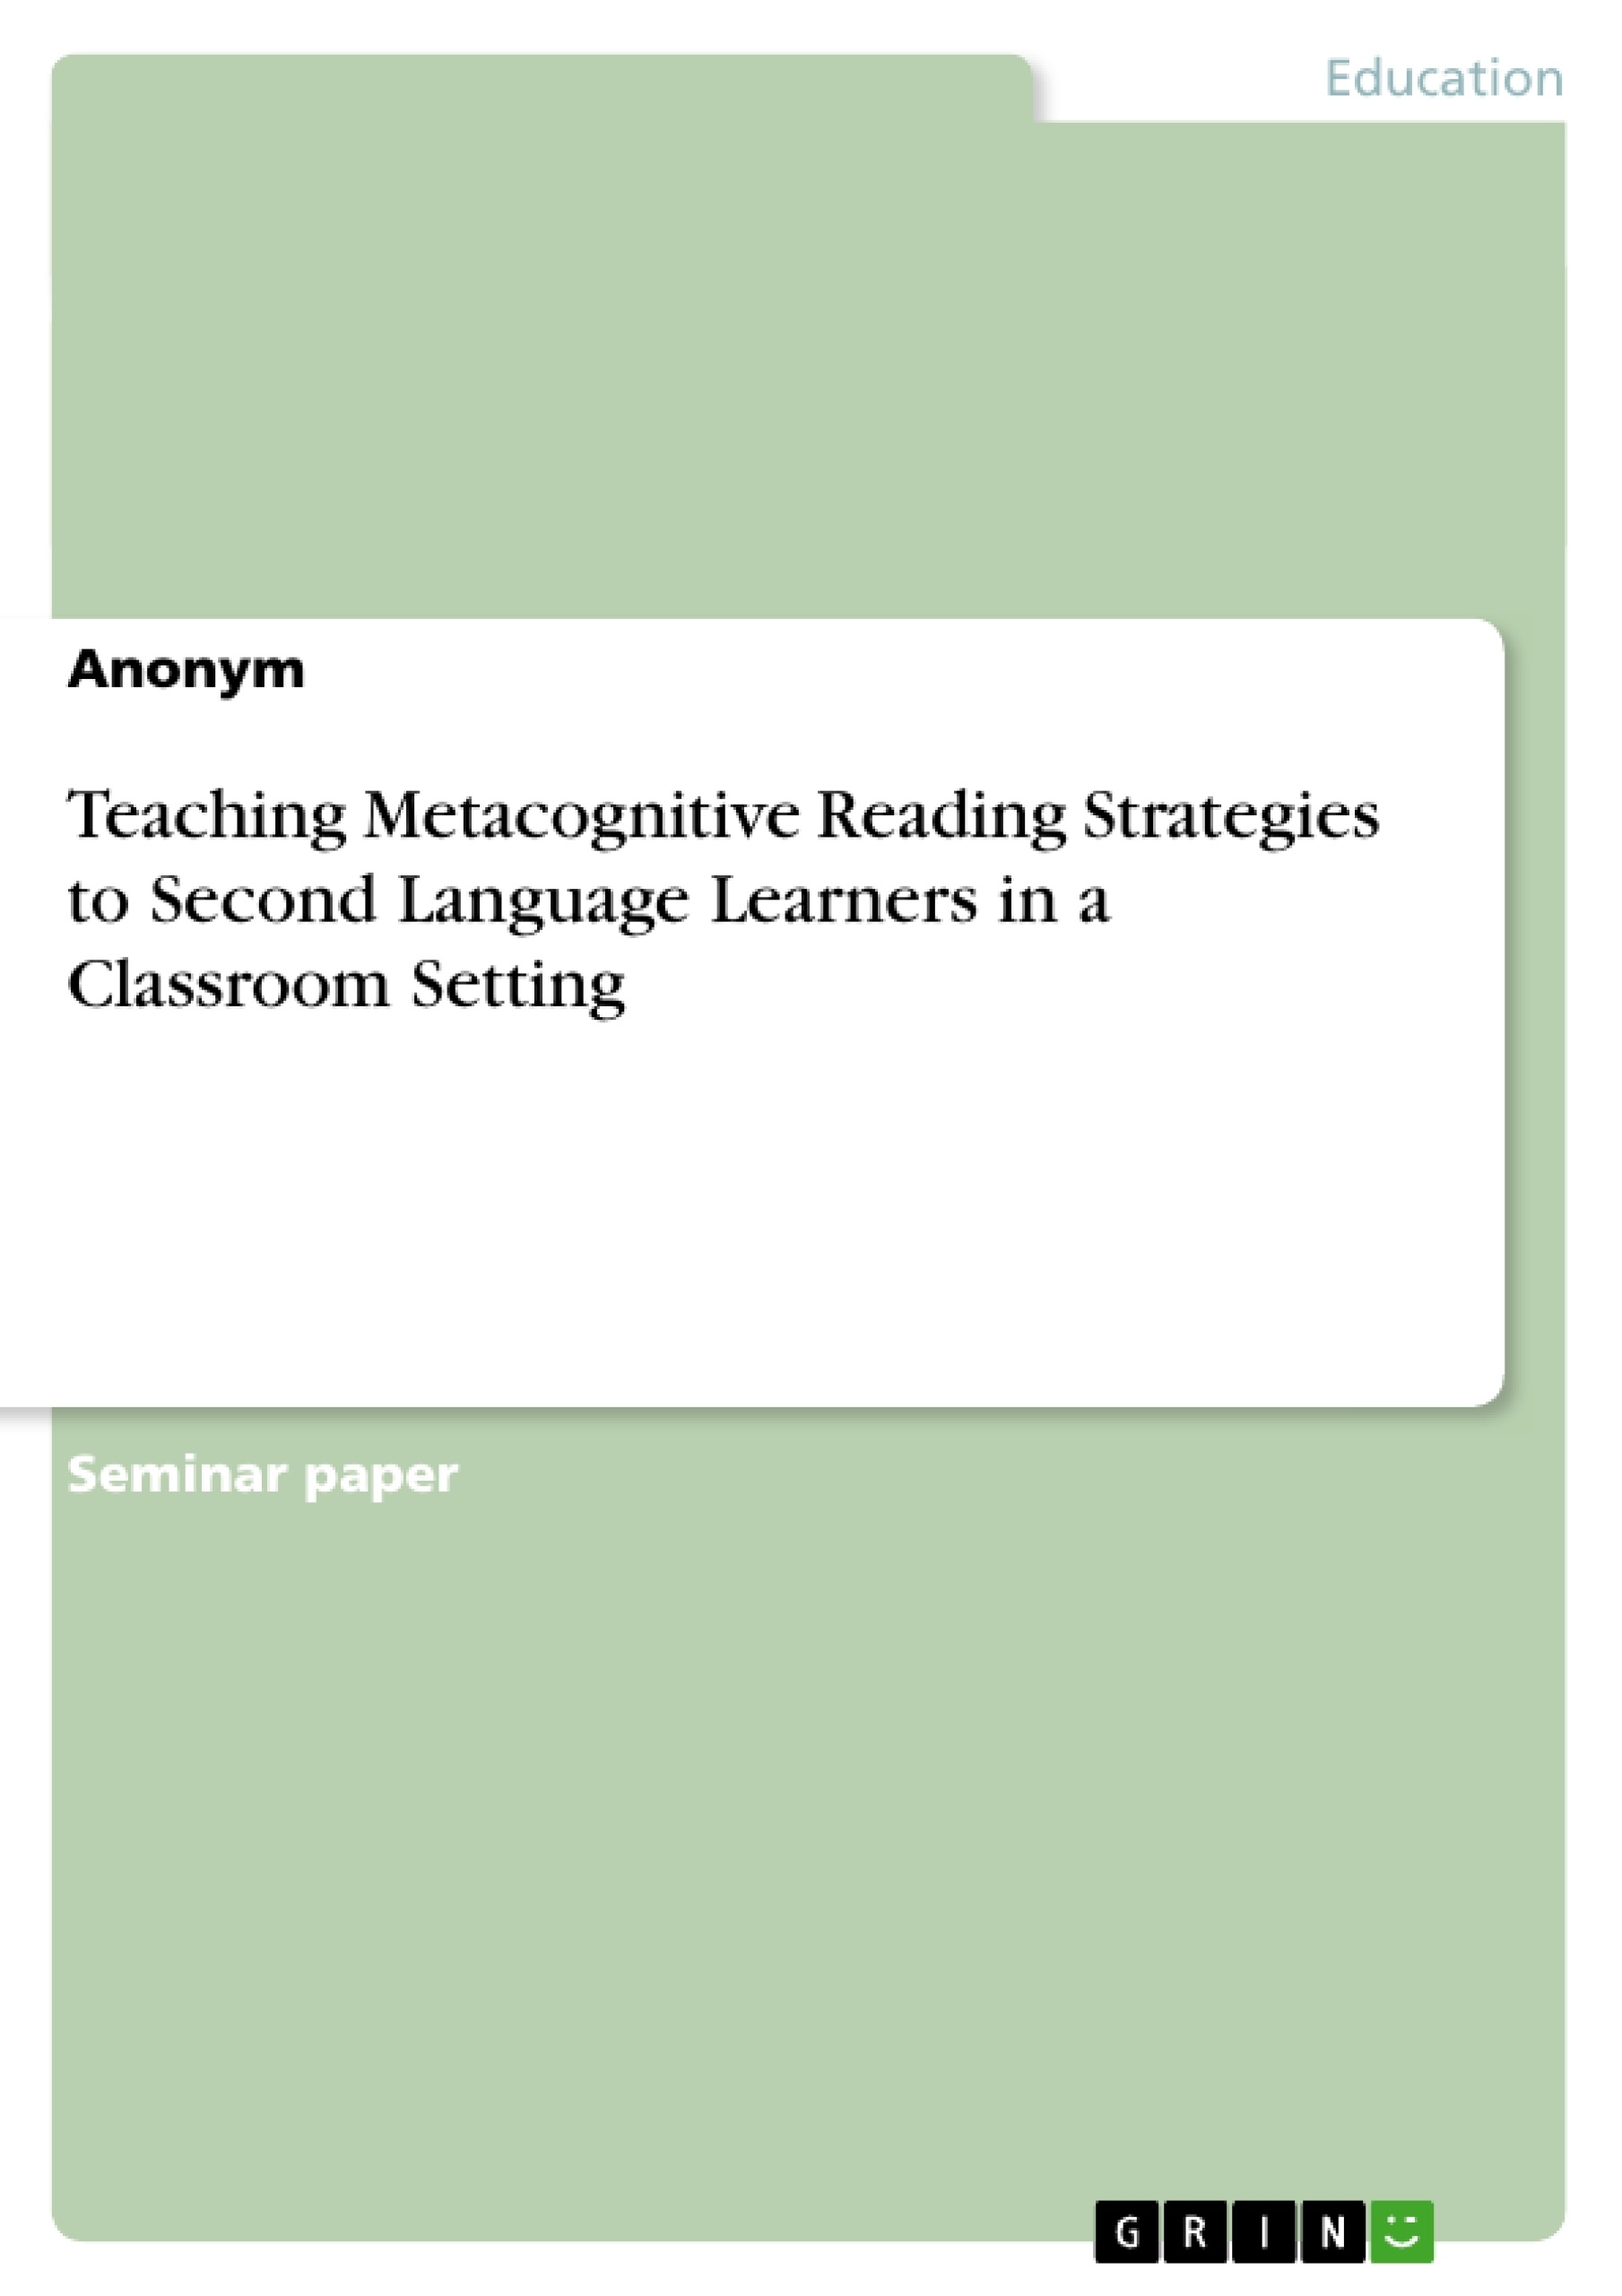 Title: Teaching Metacognitive Reading Strategies to Second Language Learners in a Classroom Setting